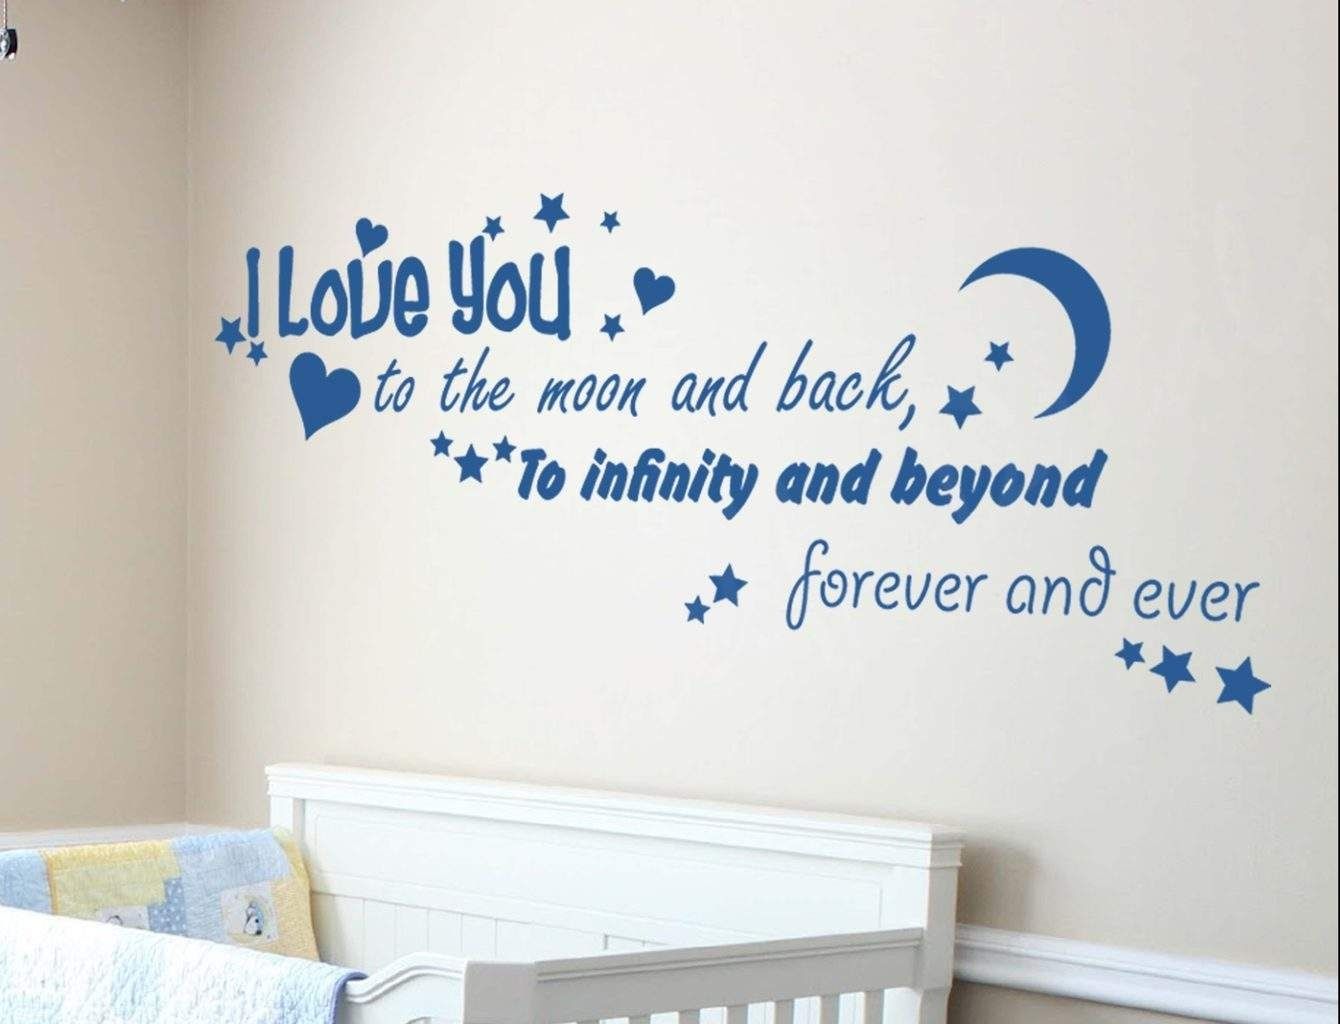 Spread Love With Love Based Wall Decals With Regard To I Love You To The Moon And Back Wall Art (View 6 of 20)